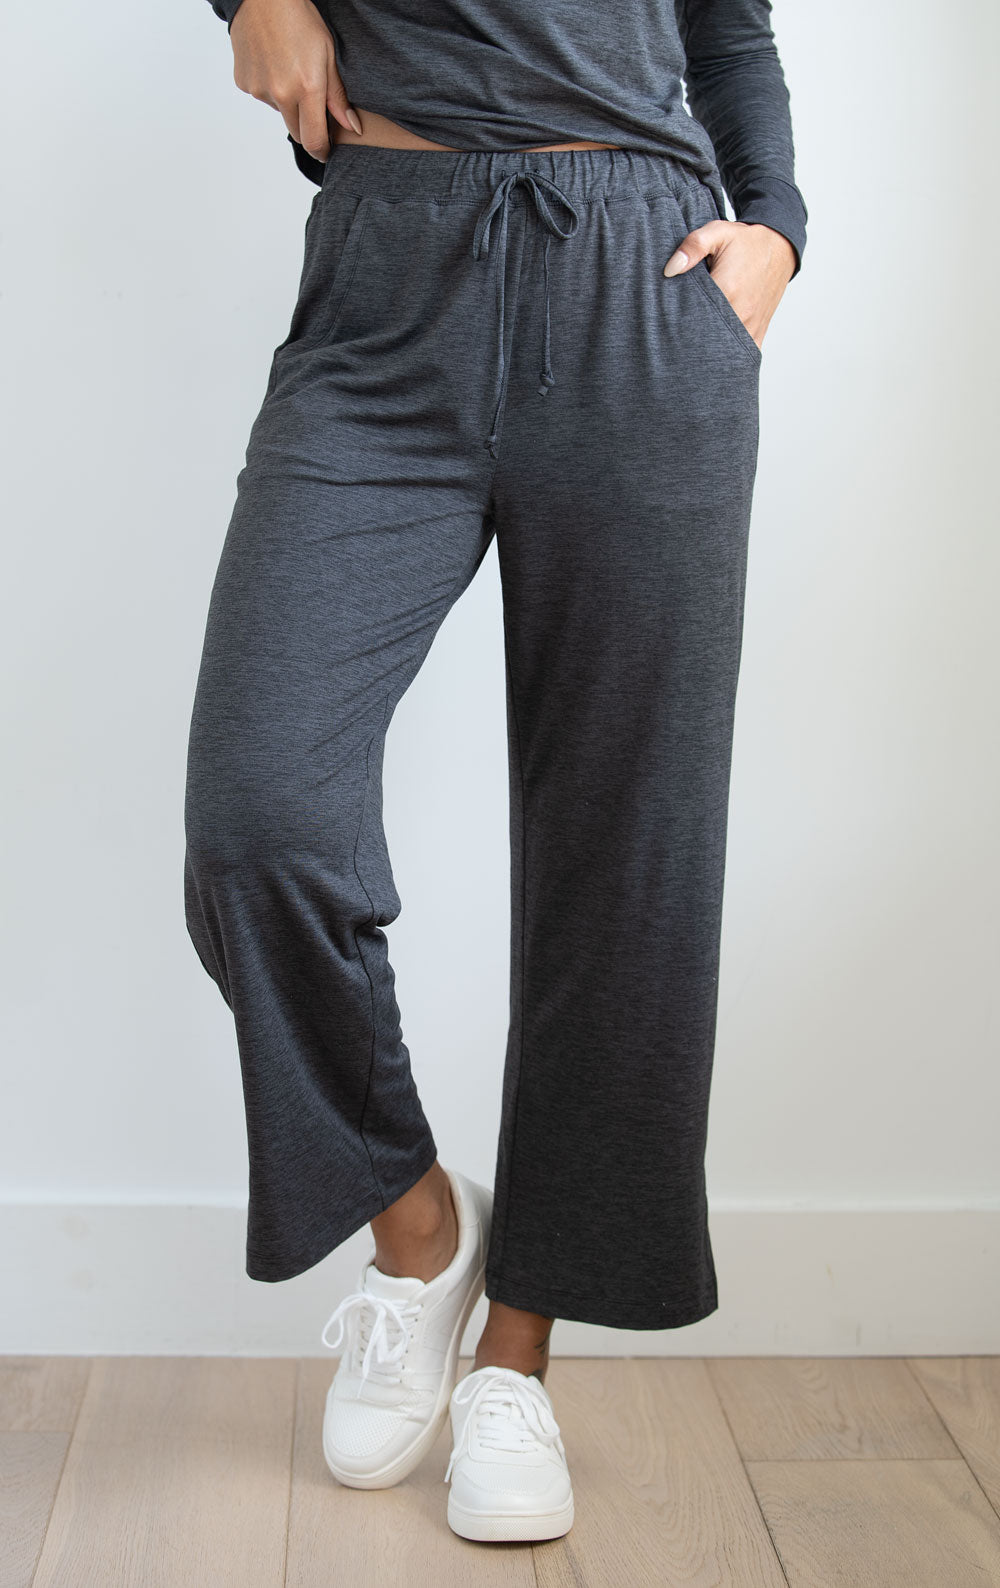 Freedom Knitwear Cropped Pant